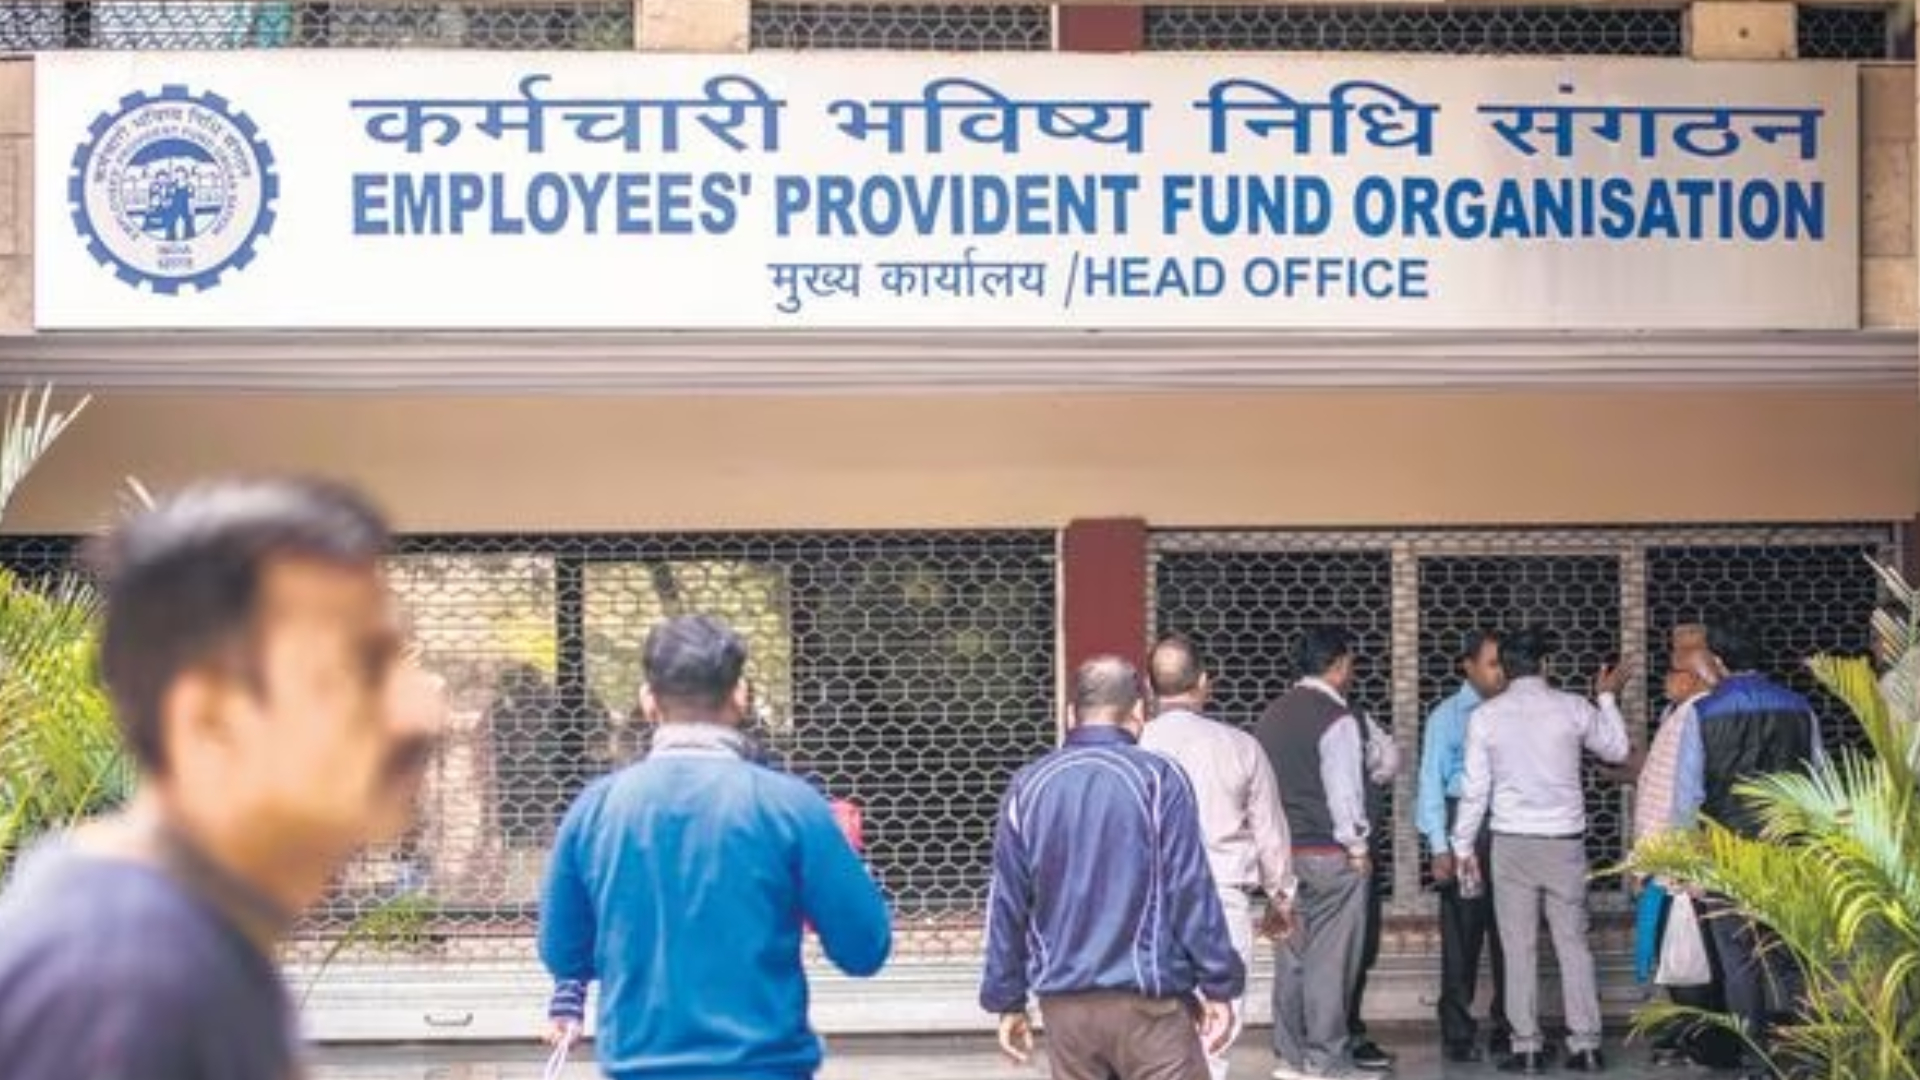 Interest rates on provident funds for 2023-24 recommended at 8.25%